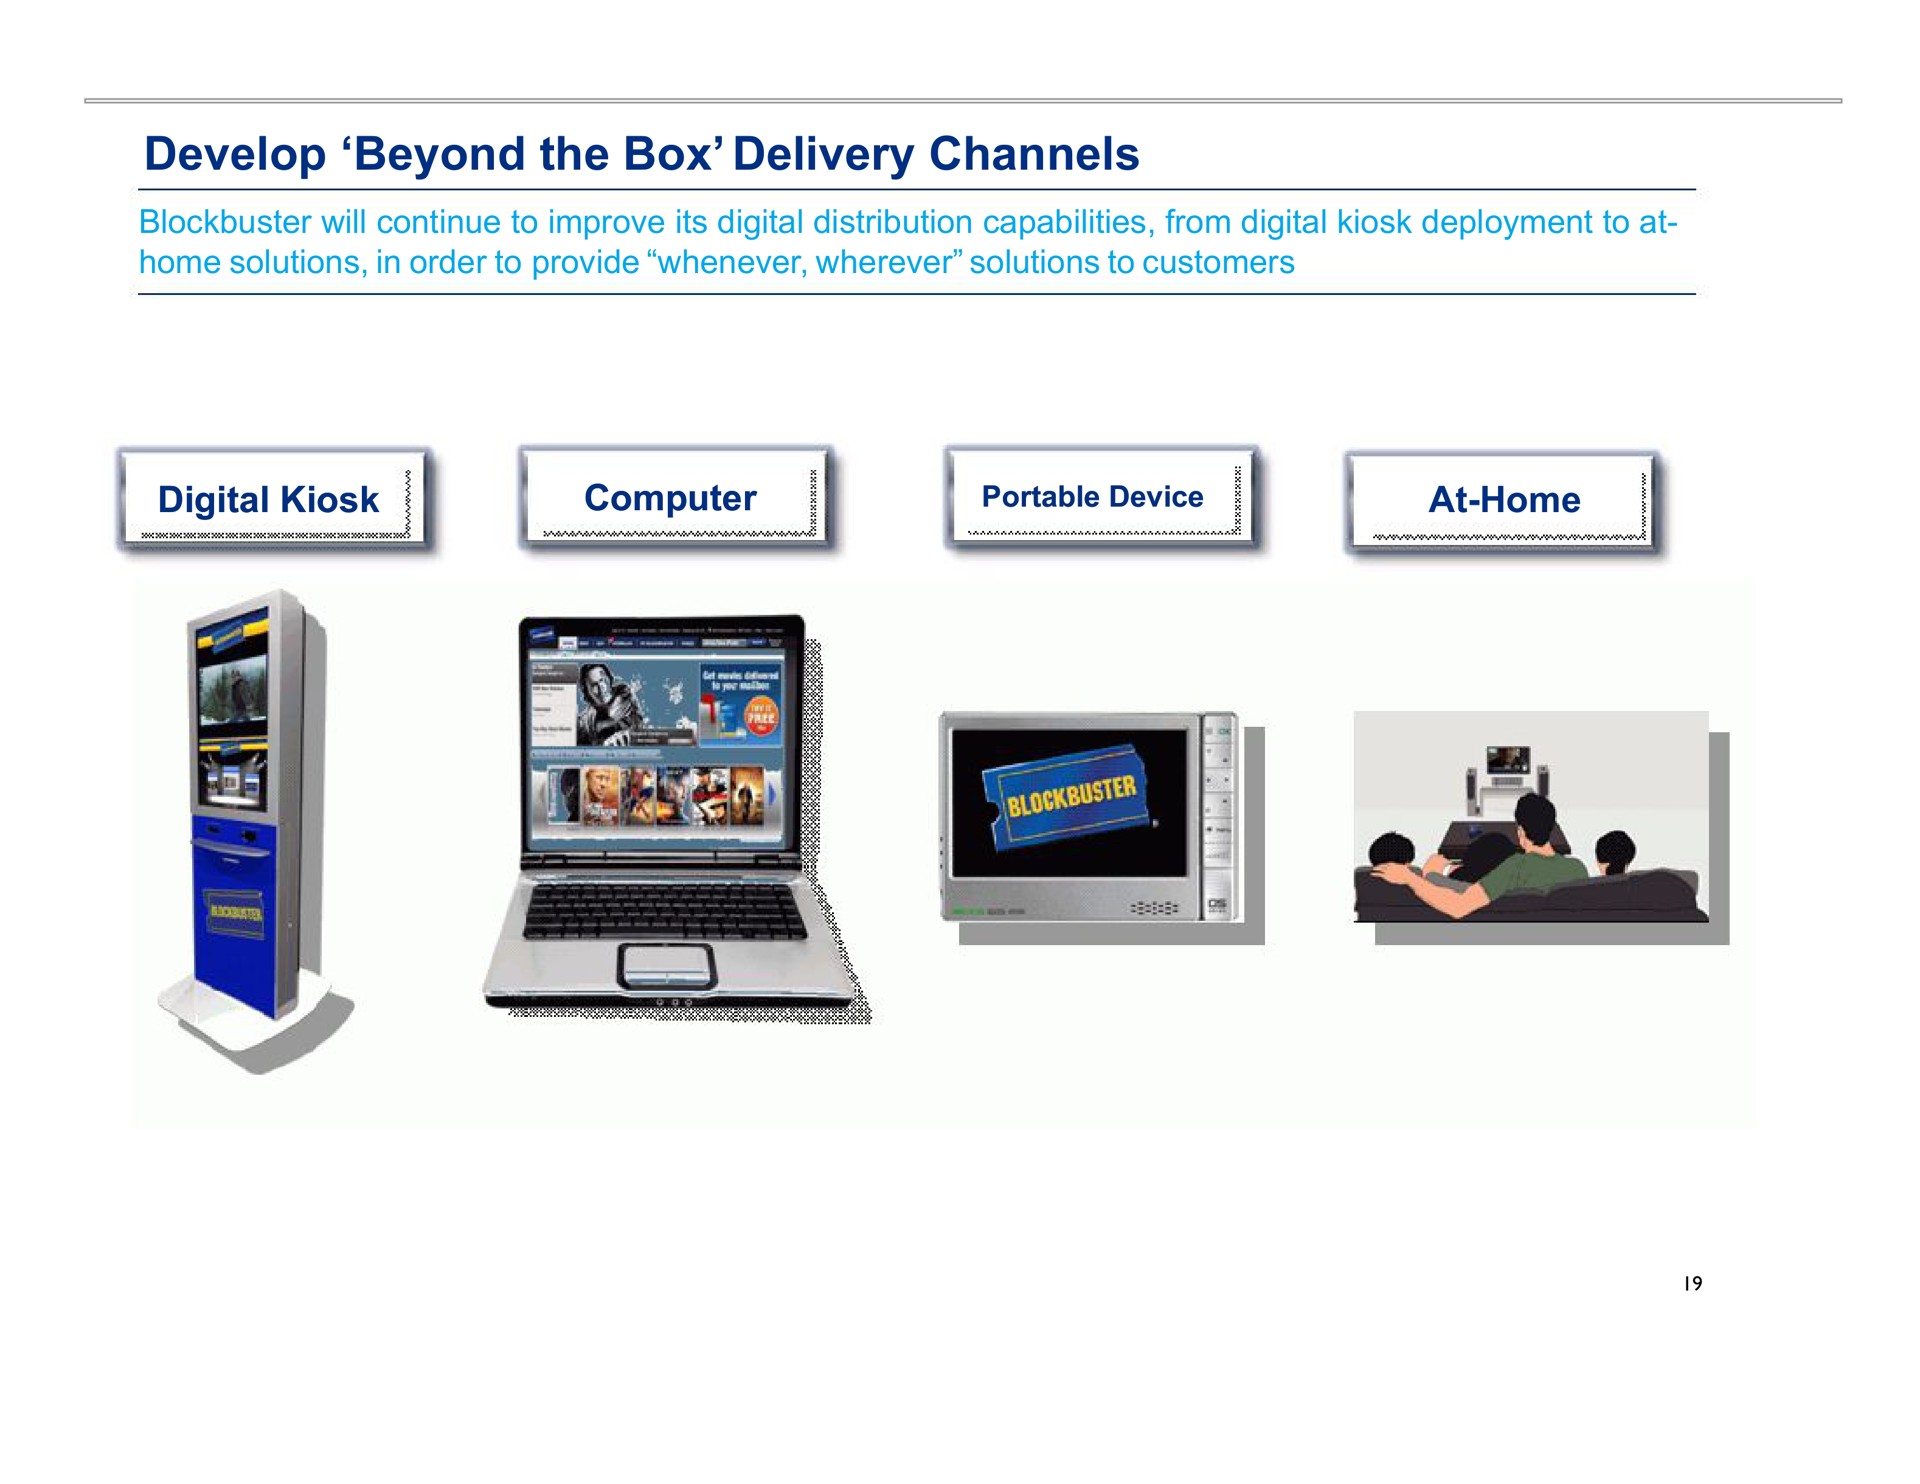 develop beyond the box delivery channels digital kiosk digital kiosk computer computer at home | Blockbuster Video